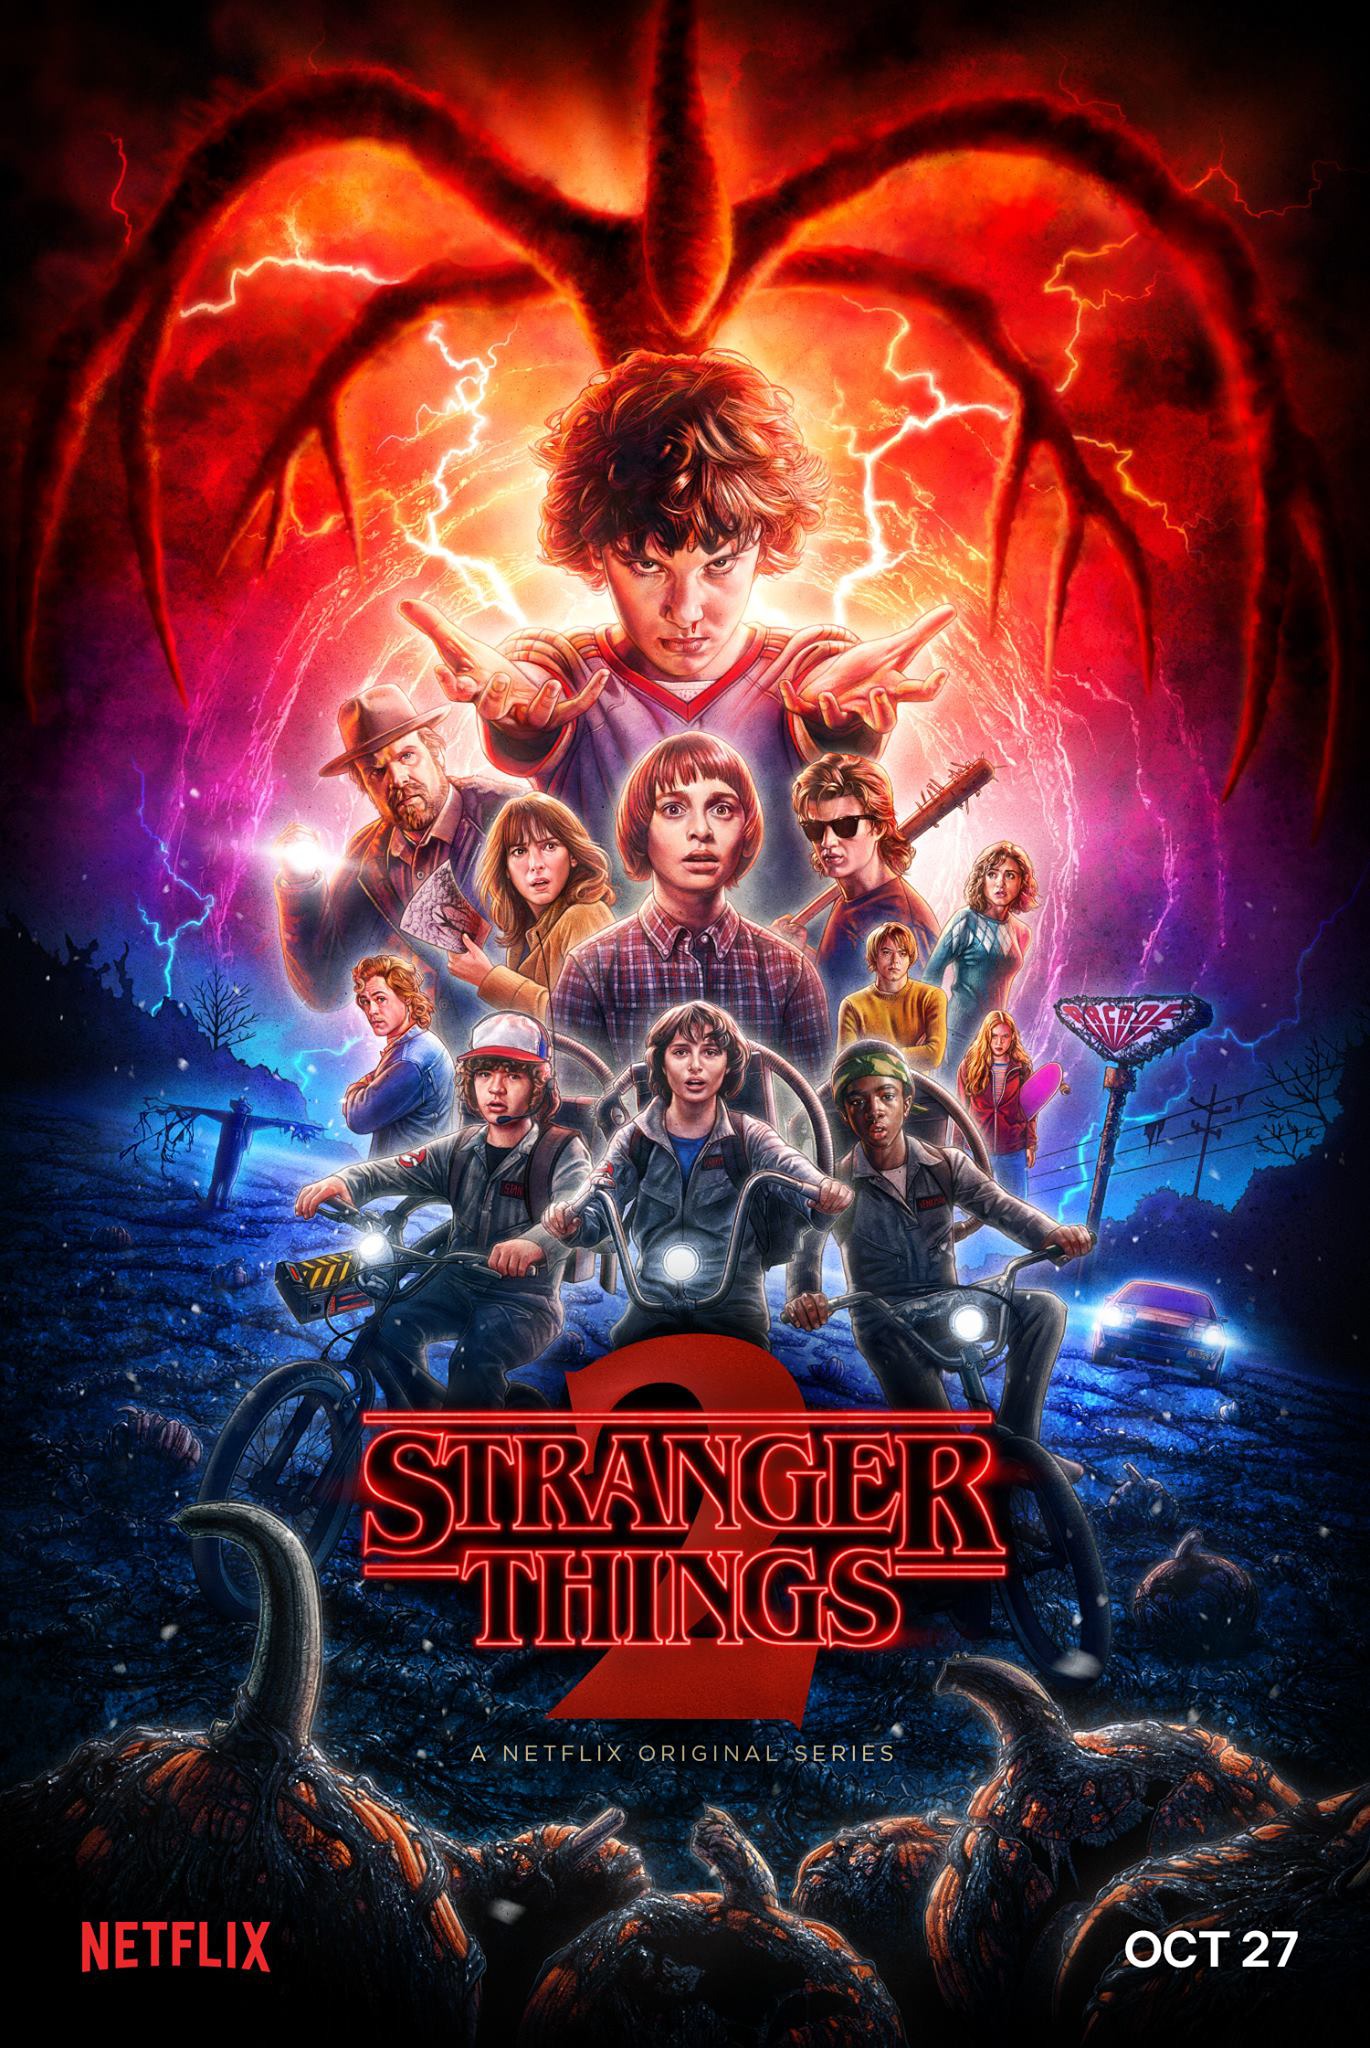 Stranger Things 2 spoiler-free review: does the Netflix sensation still have the magic?